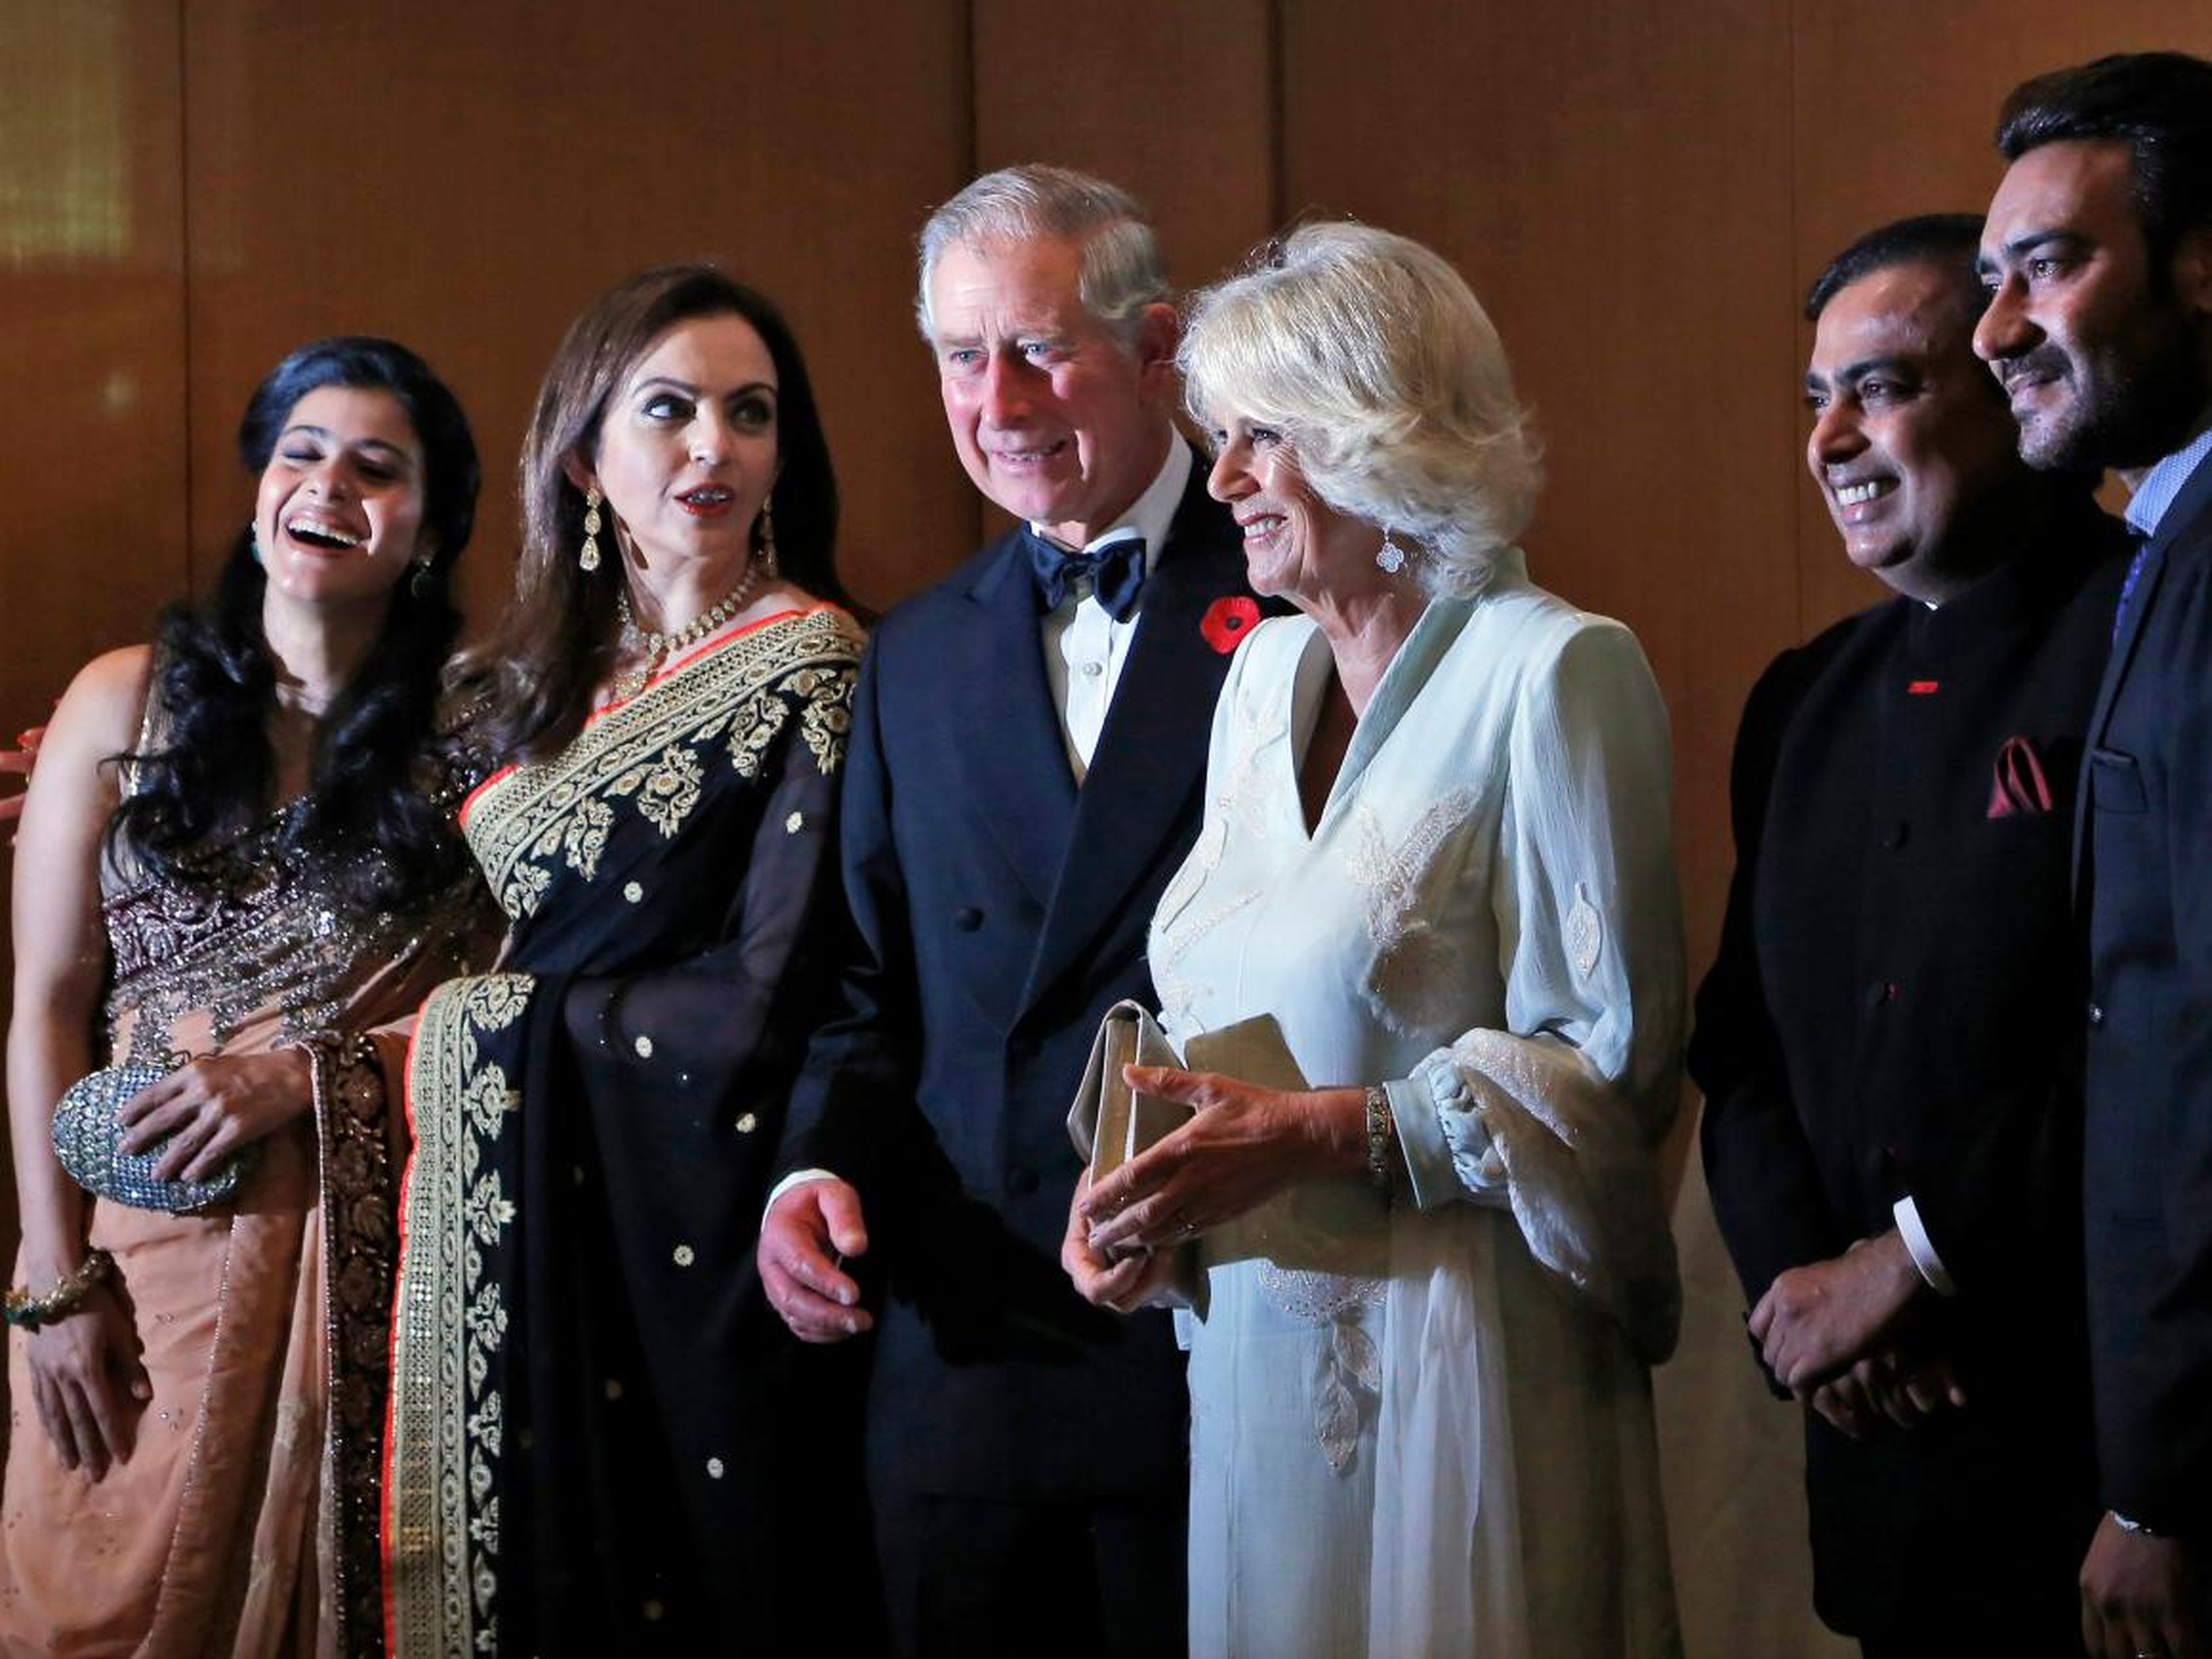 From left: actress Kajol, Nita Ambani, Britain's Prince Charles and his wife Camilla, the Duchess of Cornwall, Mukesh Ambani, and actor Ajay Devgan stand together before a dinner to support the work of British Asian Trust in Mumbai in 2013.